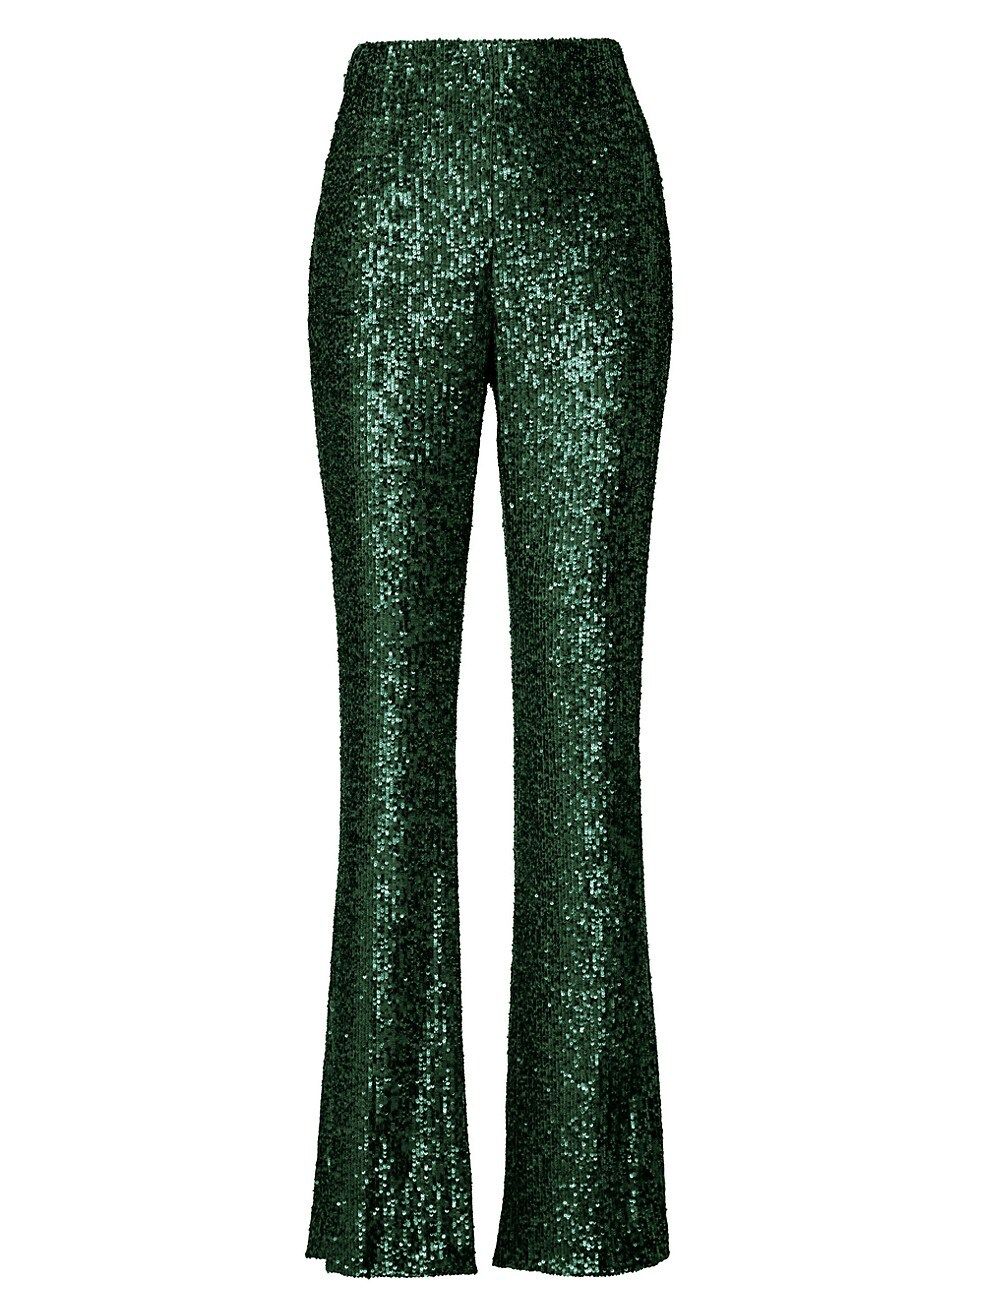 Akris Flared Sequin-Embroidered Pants | Saks Fifth Avenue